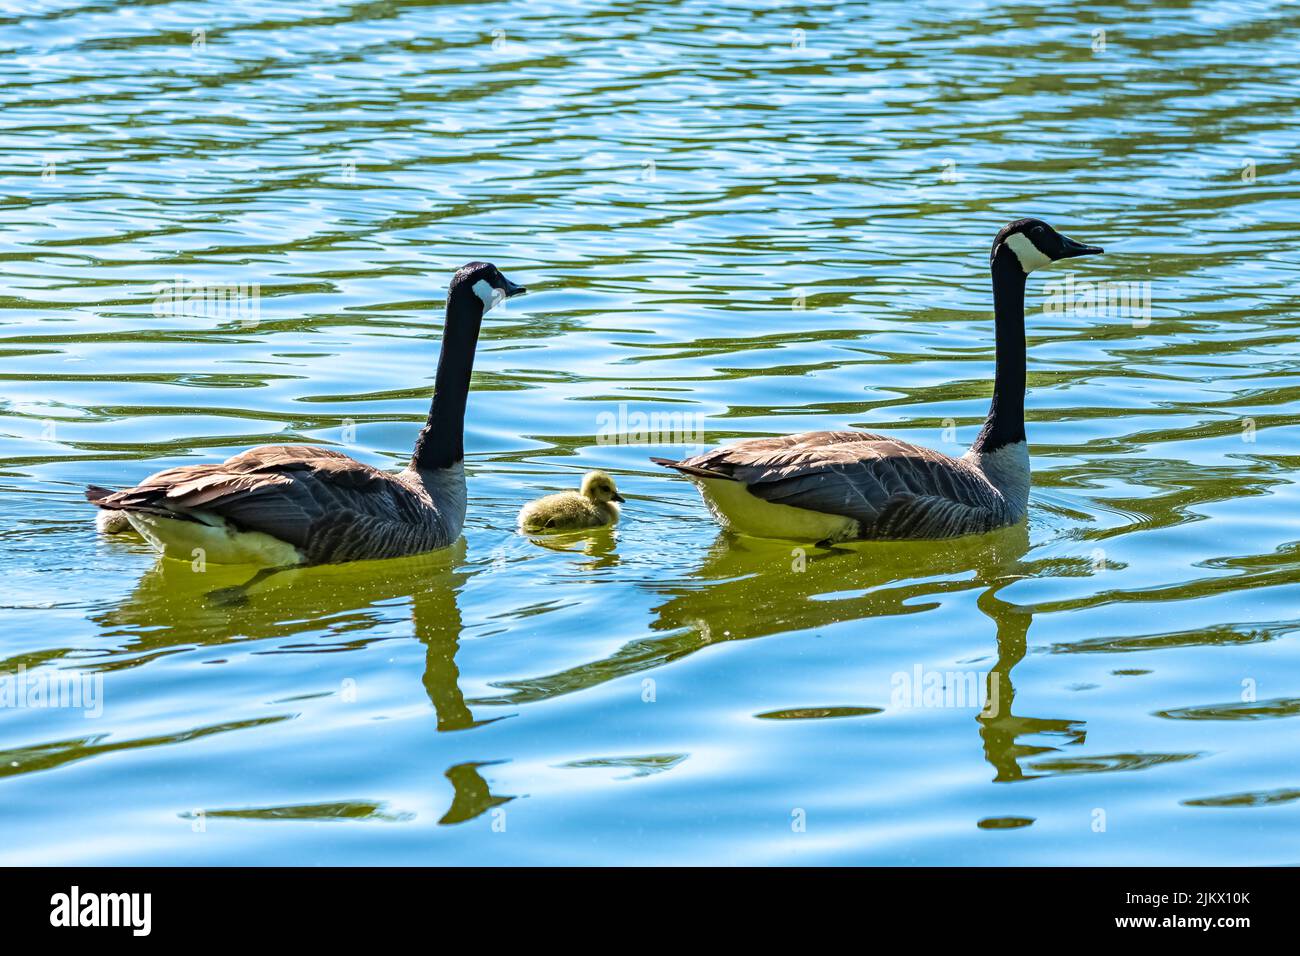 Canada goose with chicks standing on the shore of the lake Stock Photo